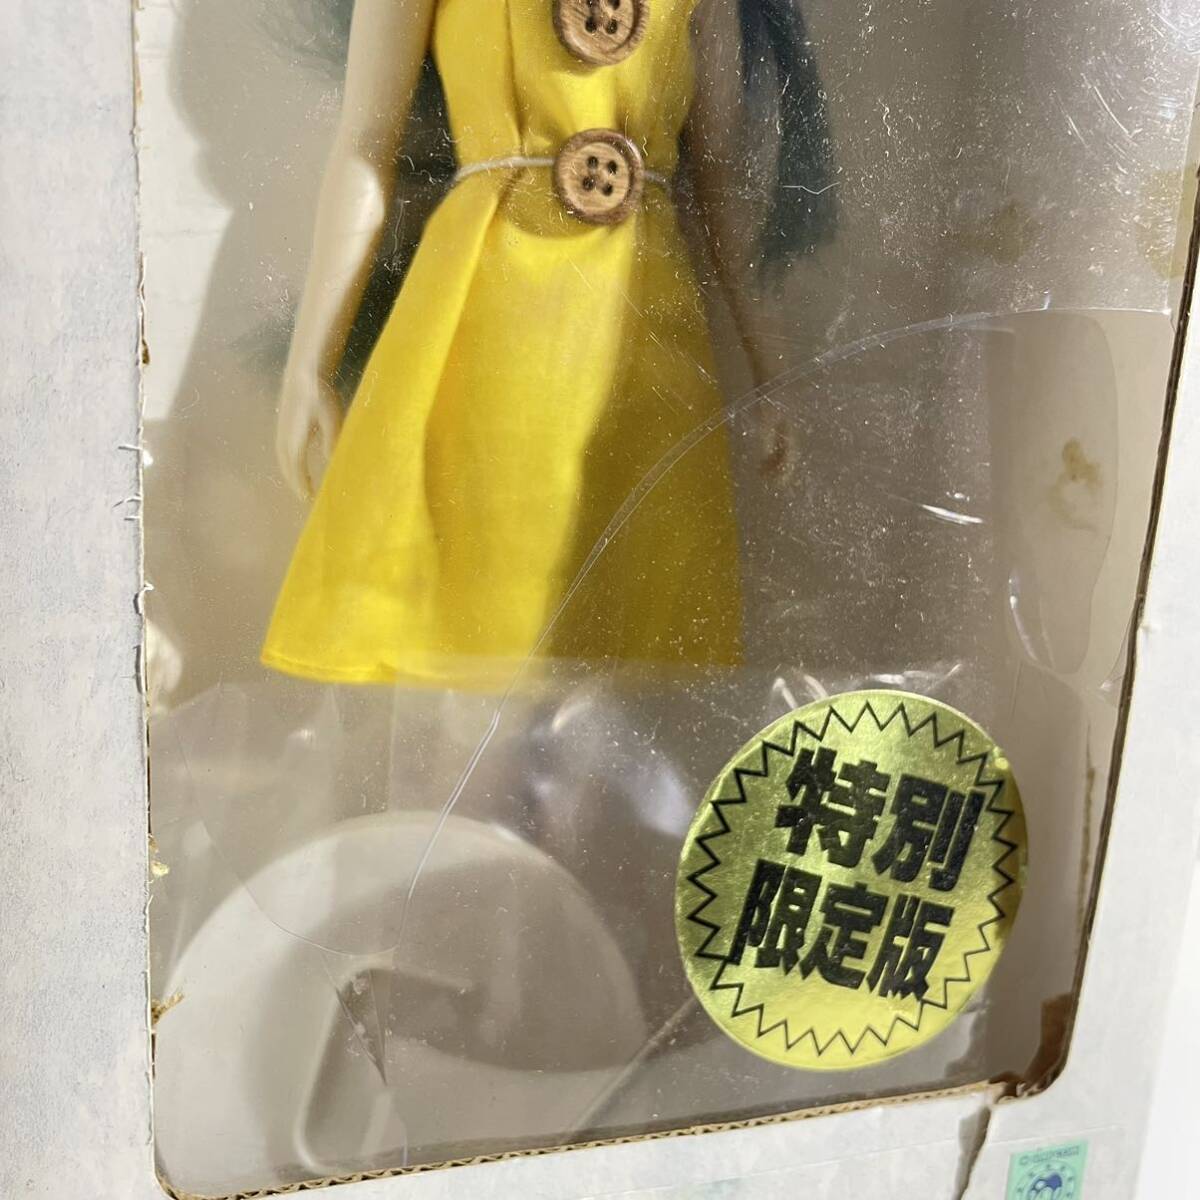  unused doll .. special limitation version quiz . not .DREAMS rainbow color block. miracle super excellent series figure doll ma-mito